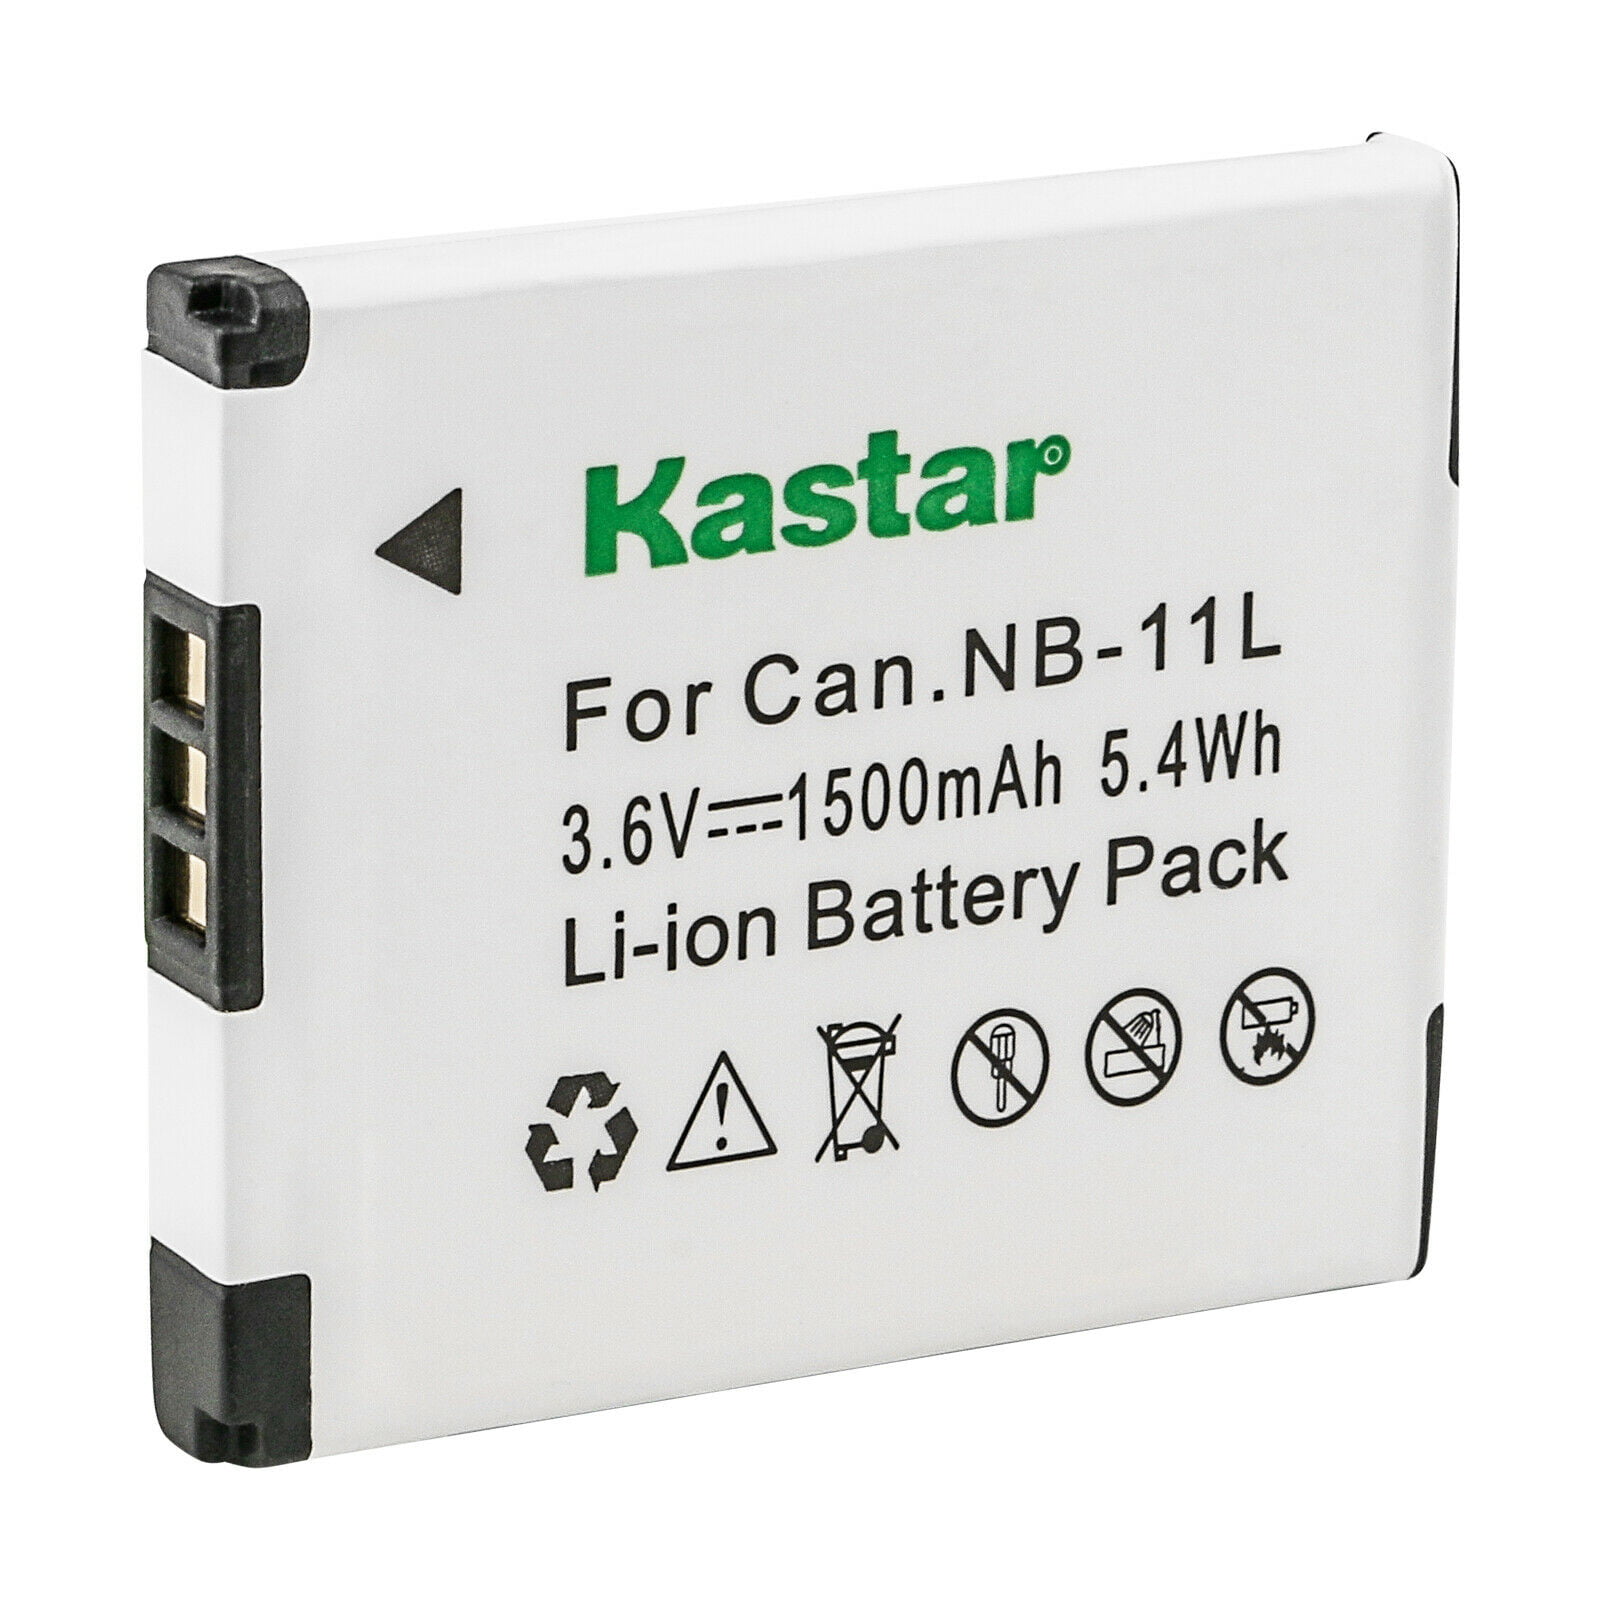  Kastar 2-Pack LB-060 Battery and Charger Replacement for Kodak  PixPro AZ522 AZ521, Kodak PixPro AZ501, Kodak PixPro AZ421, Kodak PixPro  AZ365 AZ362 AZ361, Kodak PixPro AZ525 AZ526, Kodak PixPro AZ251 